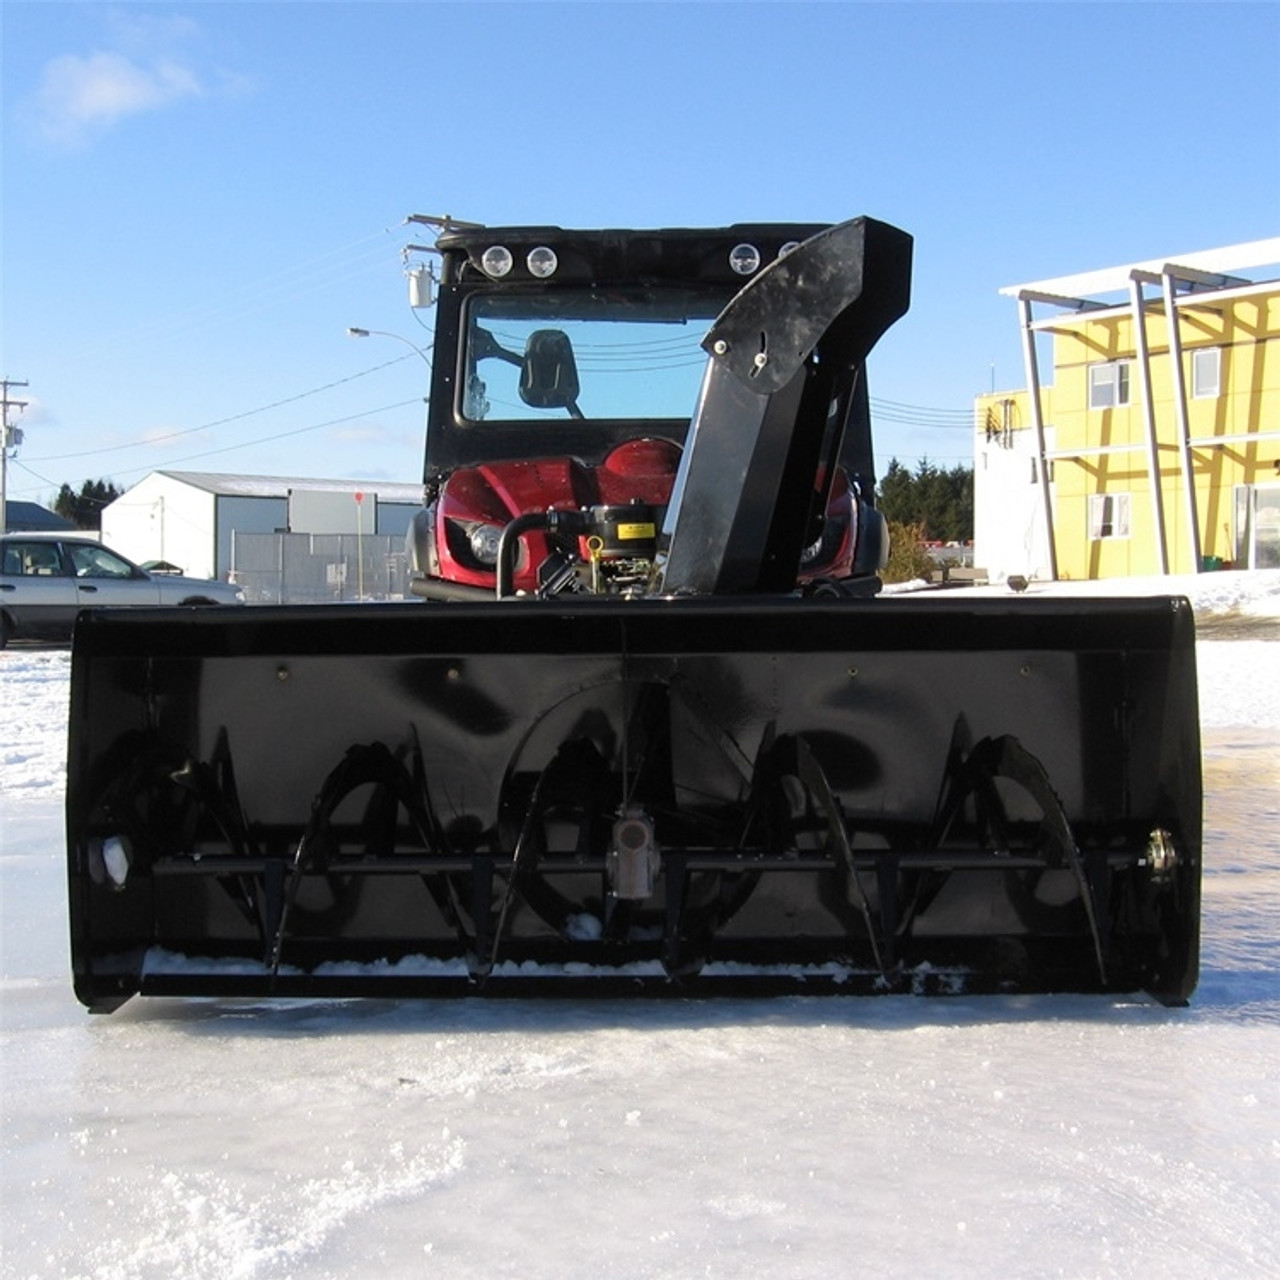 A picture facing the front end of a UTV parked on icy terrain with a Bercomac John Deere Gator XUV Snowblower installed